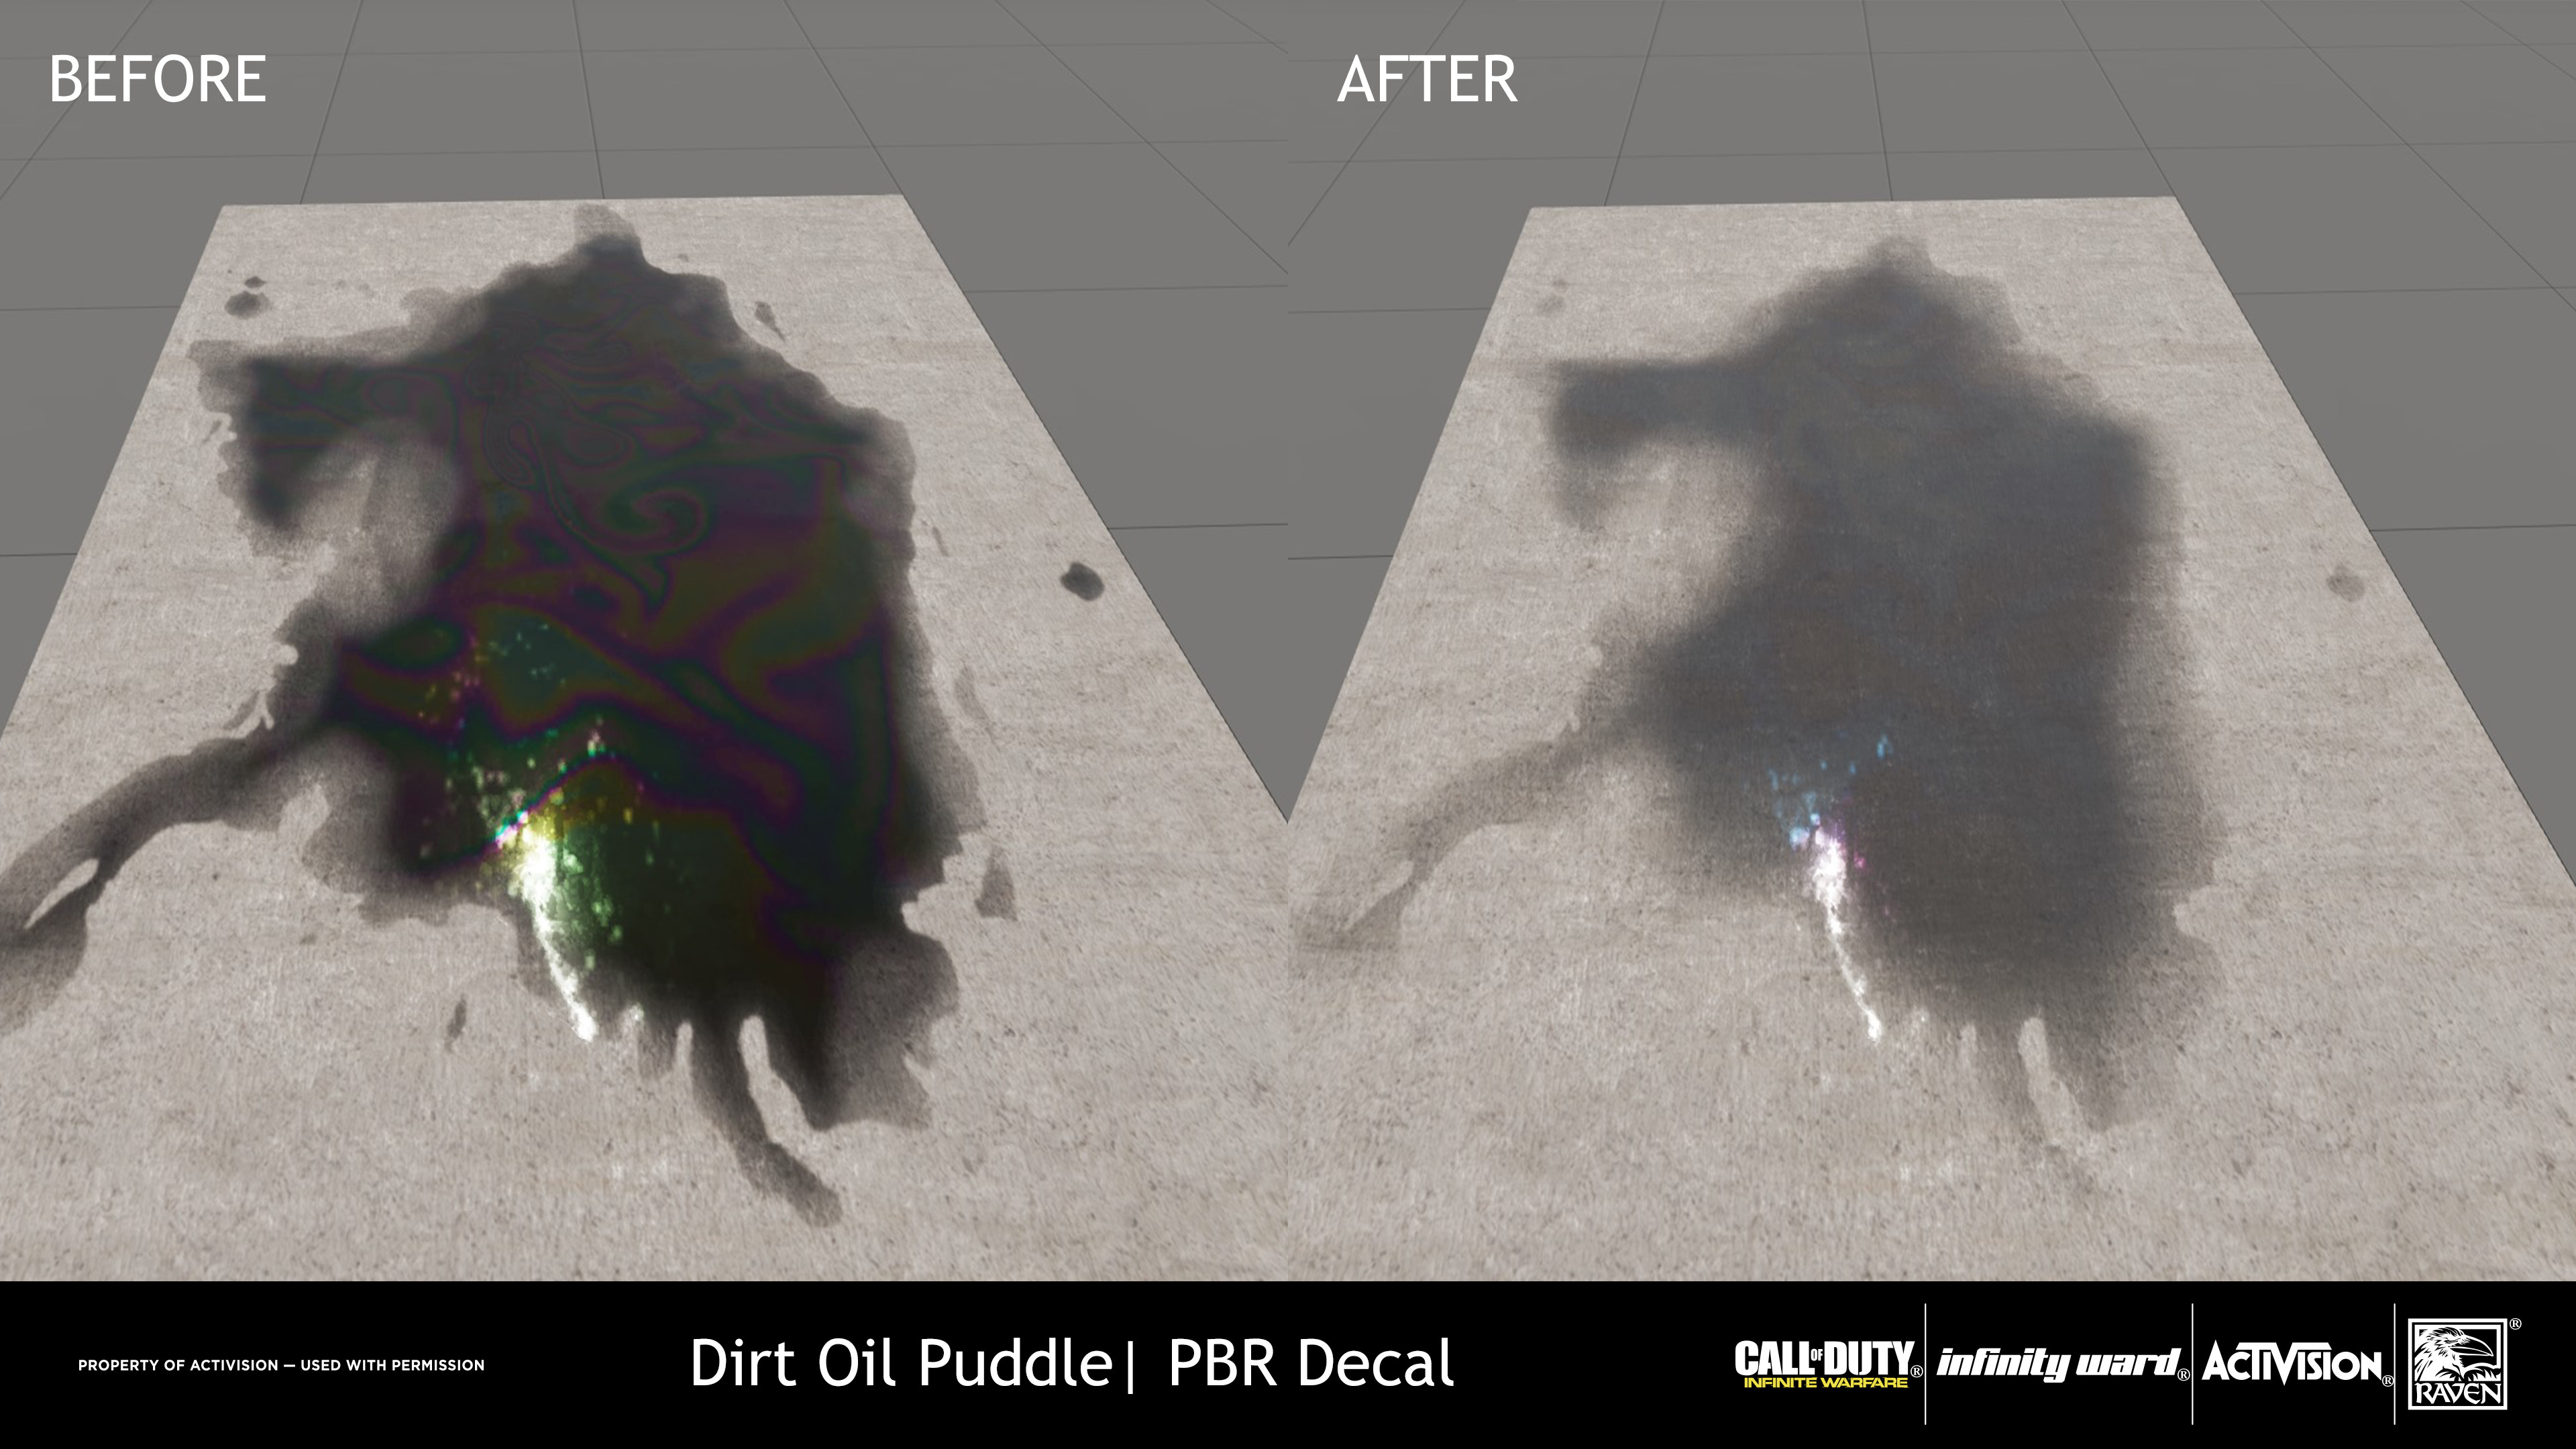 For the Oil puddle, Iridescence mask were generated and the value for the highlight was lowered. Diffuse value was adjusted to be lighter while still having a dark value for the opaqueness.